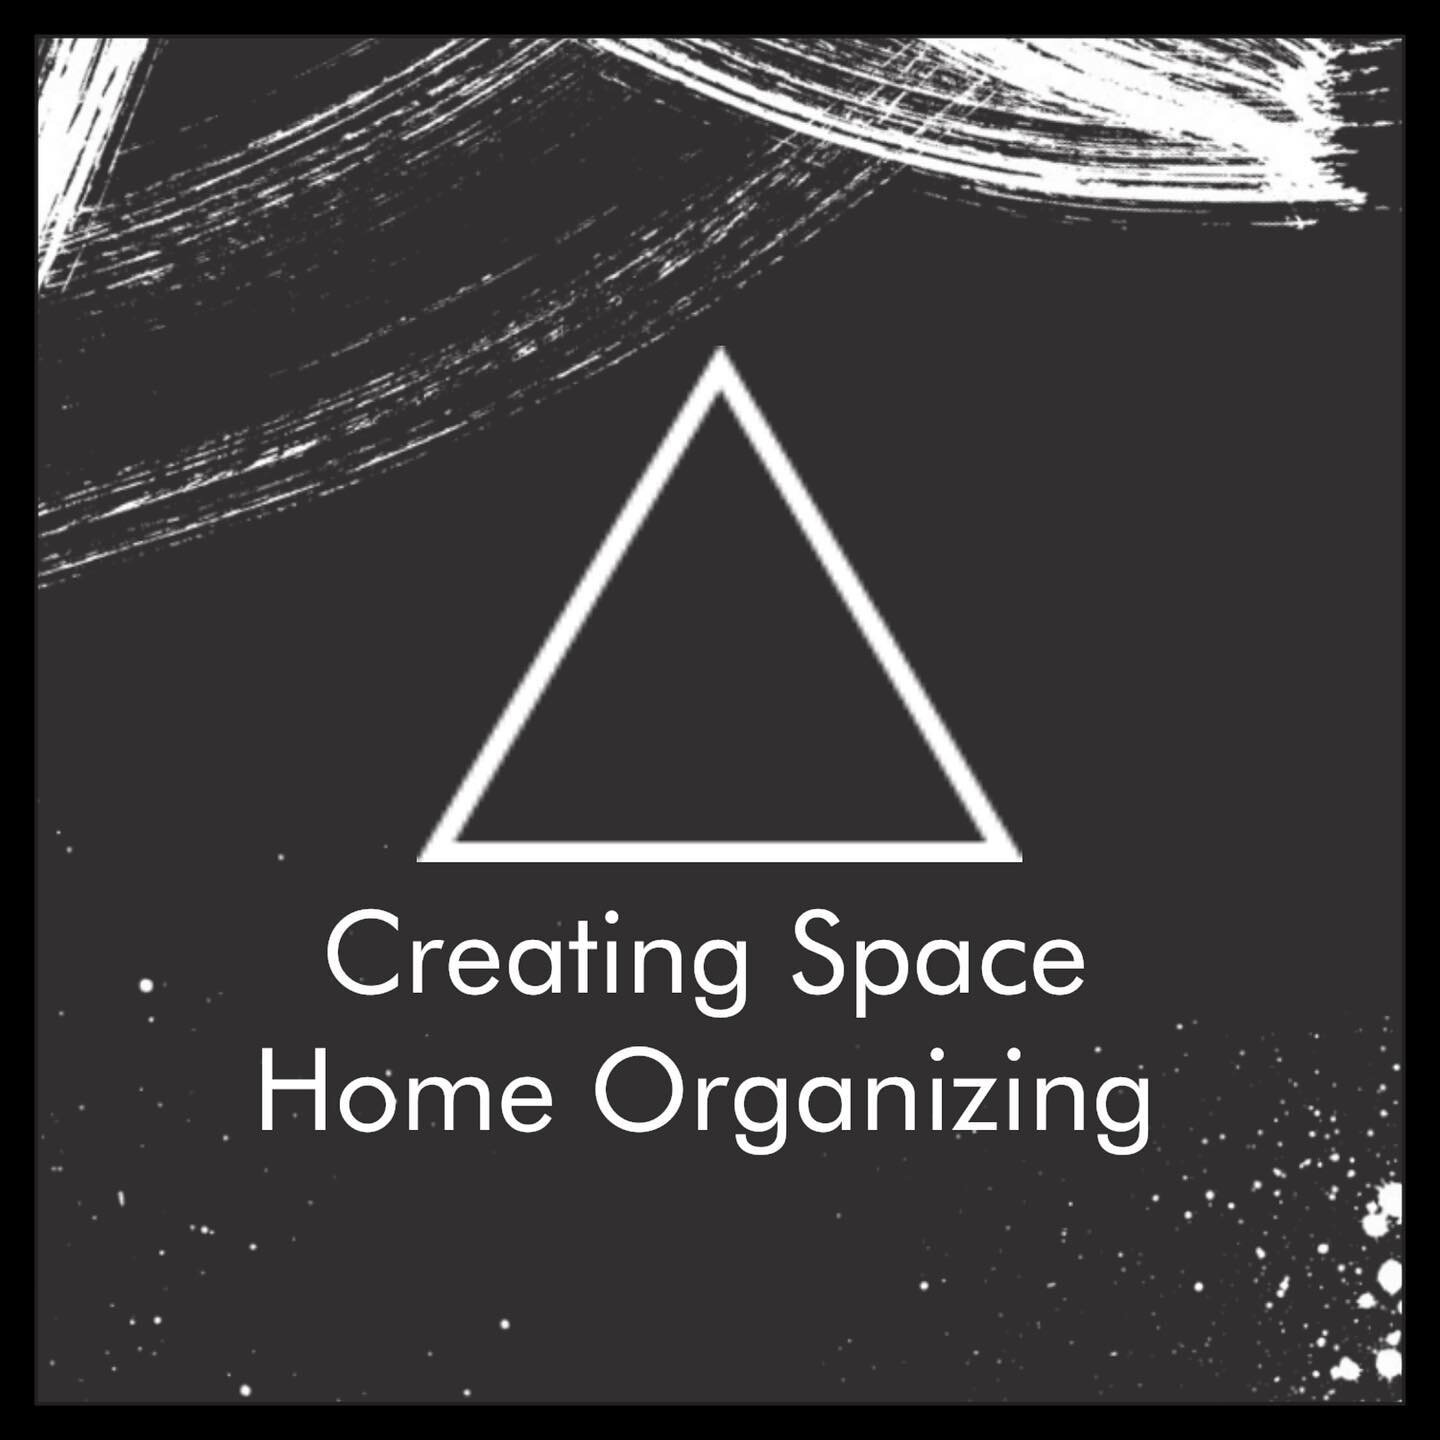 &bull; Home Organizing Sessions 
3 hours In-person or virtually
&bull; Consignment Sales 60/40 split
&bull; Move Logistics

Often in life, we are met with work that we expect ourselves to be able to do on our own. 

&ldquo;You SHOULD be able to do th